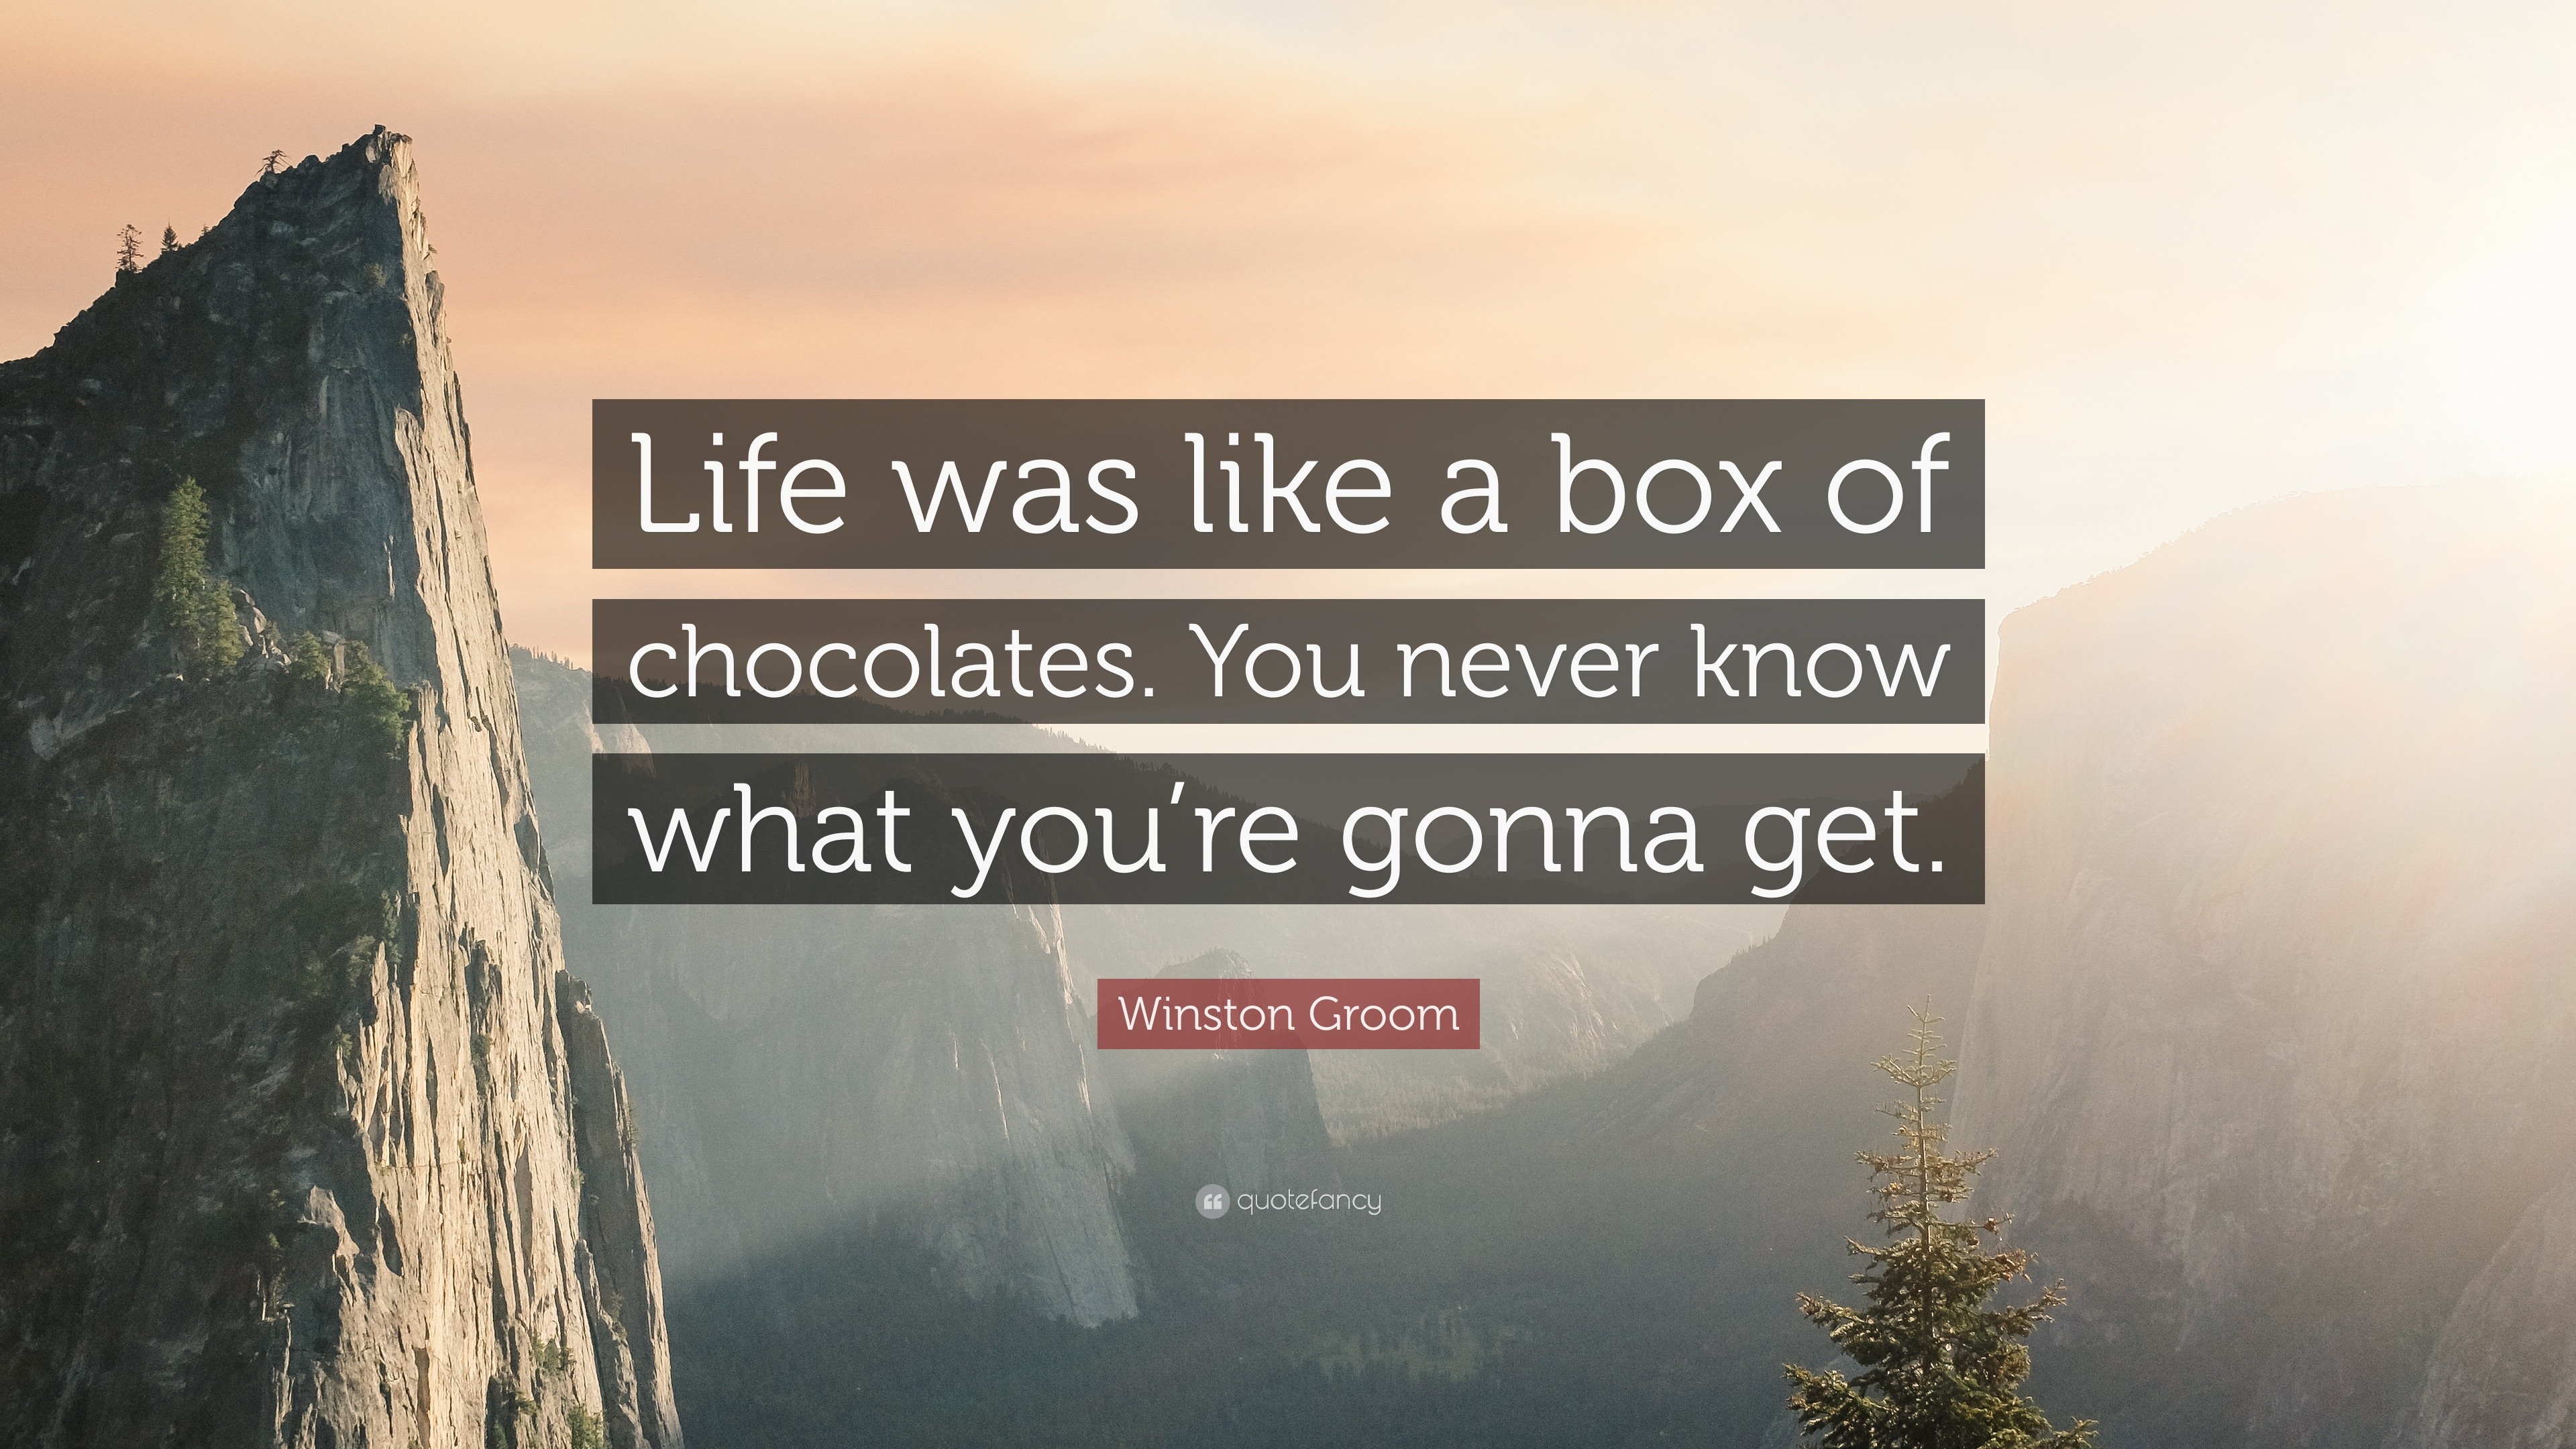 Winston Groom Quote Life Was Like A Box Of Chocolates You Never Know What You Re